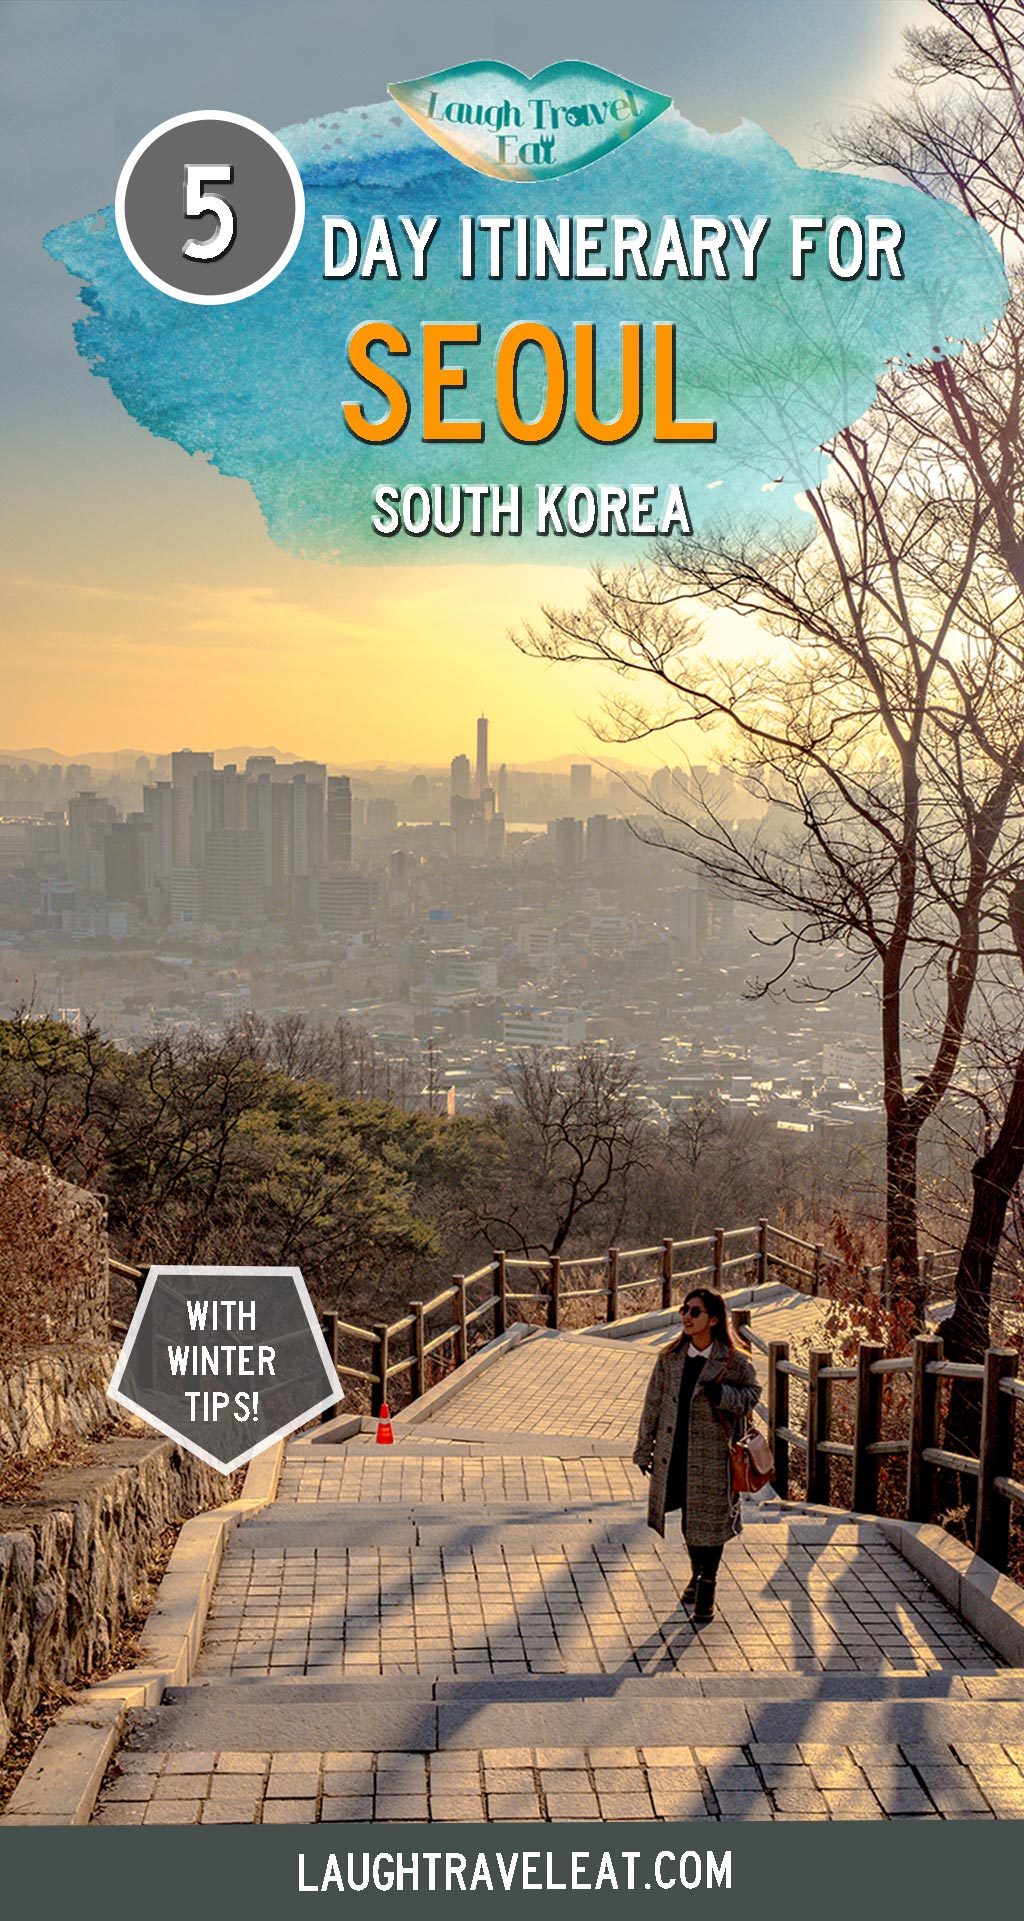 Seoul is a wonderful city to visit but in Winter it can be a bit harder to sight see given the cold. On the flip side, winter means less tourists and even a chance to see snow! Many of the things you can still do year round but given the cold, we did do less that we’d of it’s spring or autumn. Here is what we managed to do on a 5 day winter visit to Seoul: #seoul #southkorea